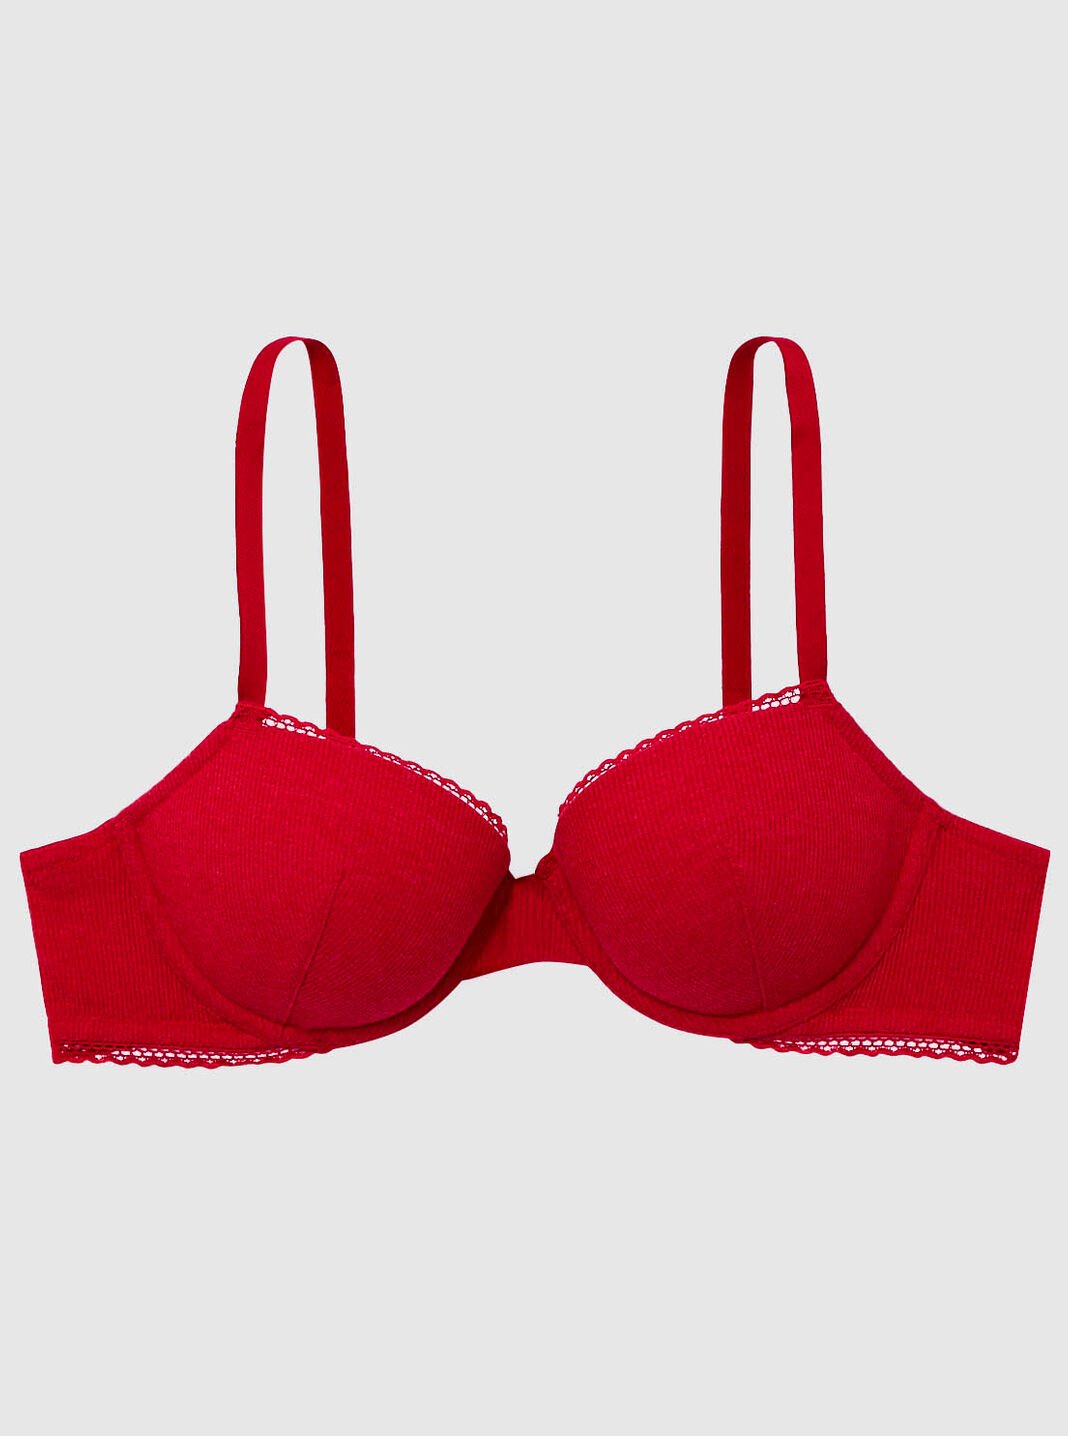 Z-O2-2 Euro  BPC Red Cotton Underwired Full Coverage Bras W/ Padded  Straps